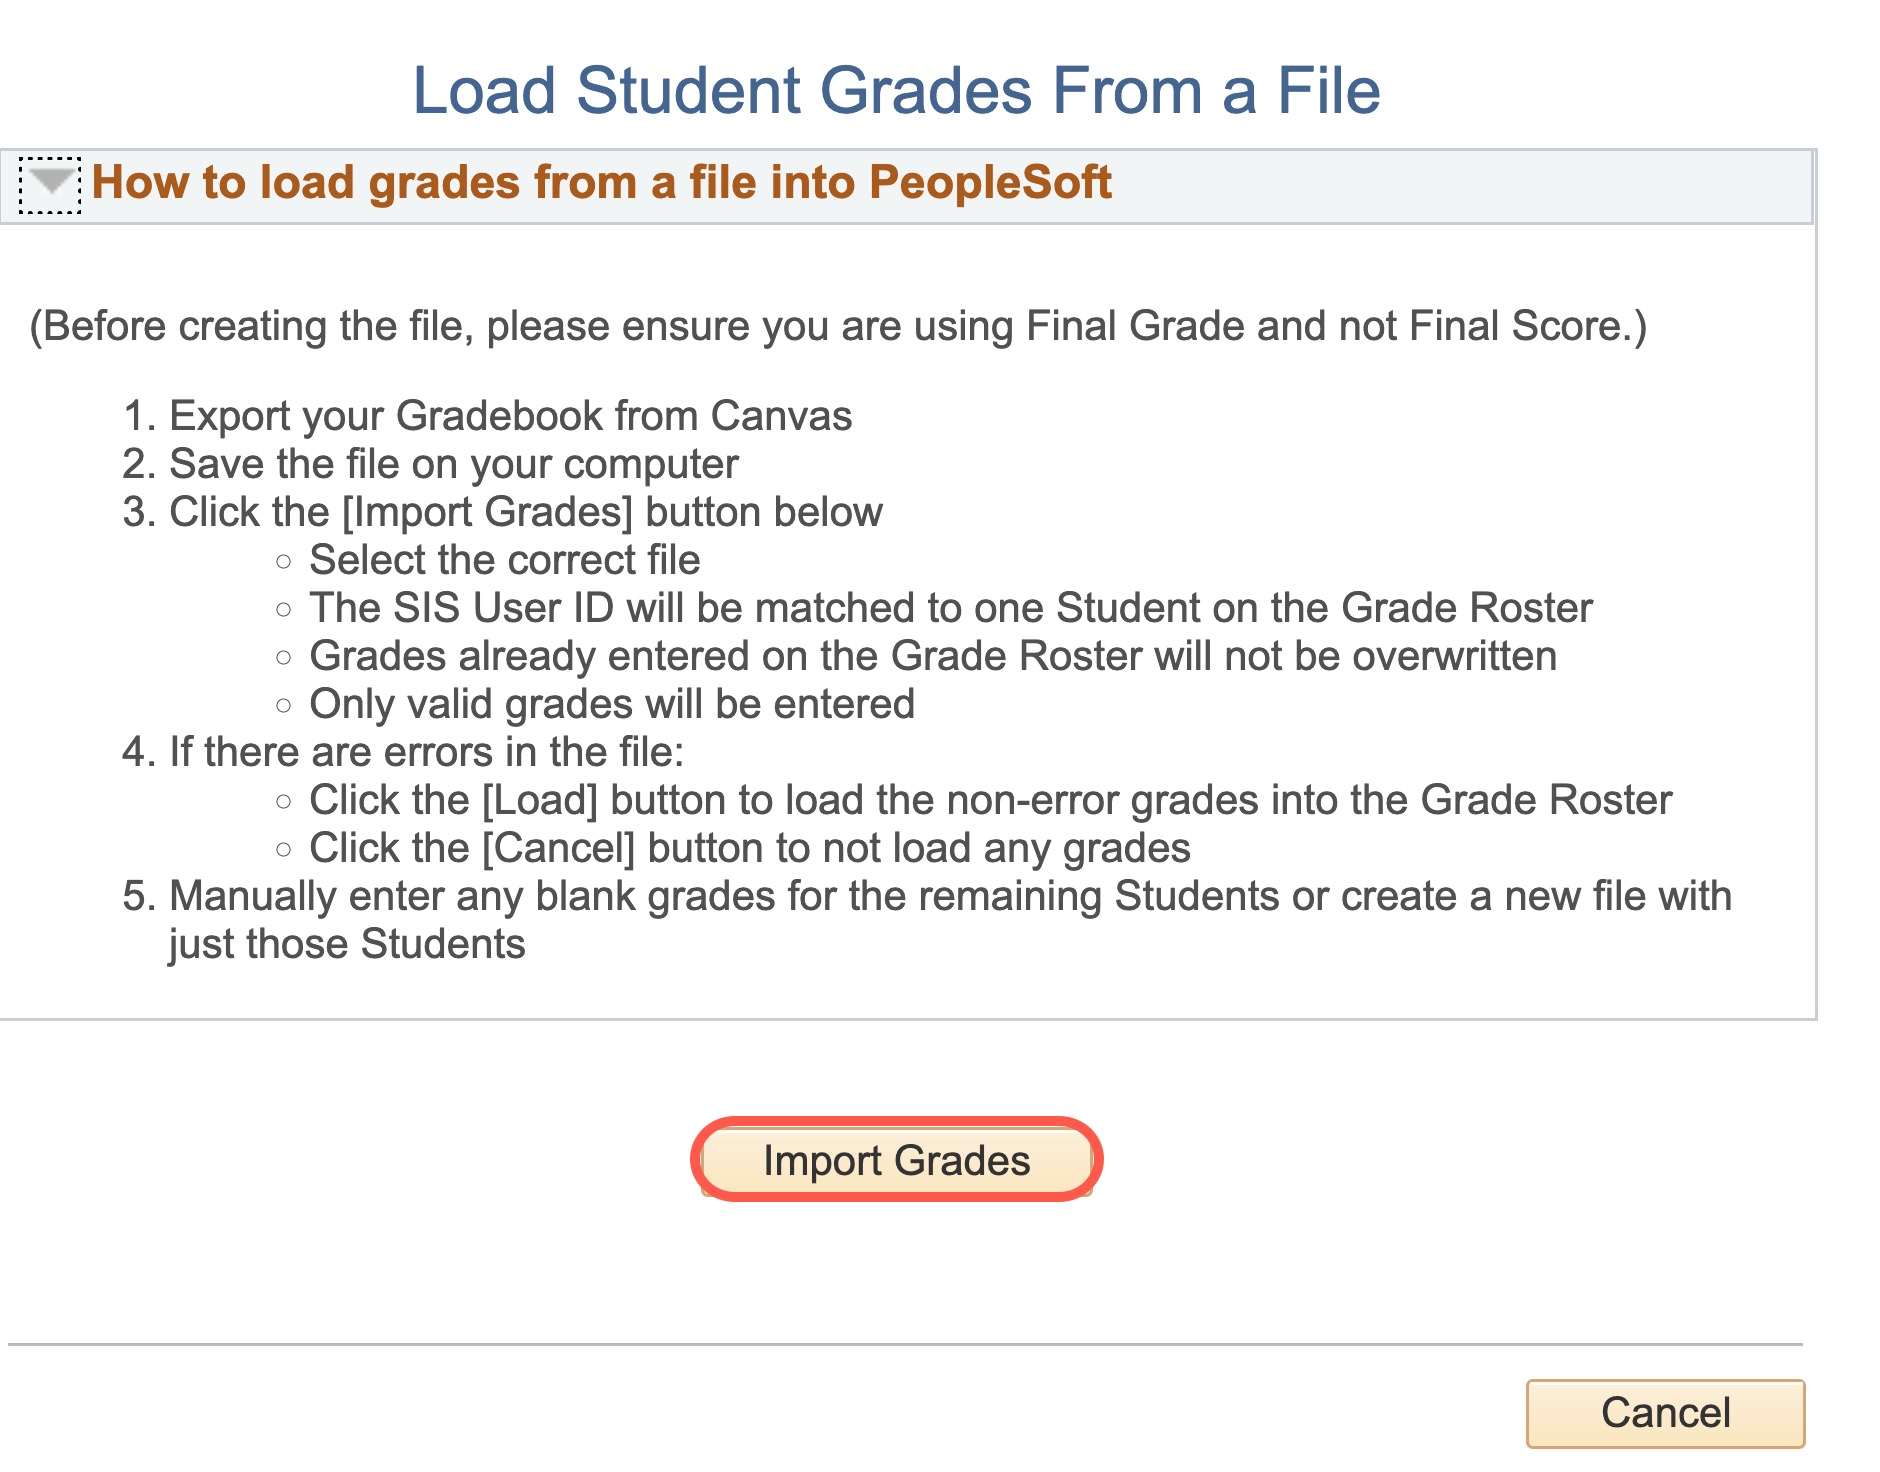 Select import Grades in "Load Student Grades From a File"